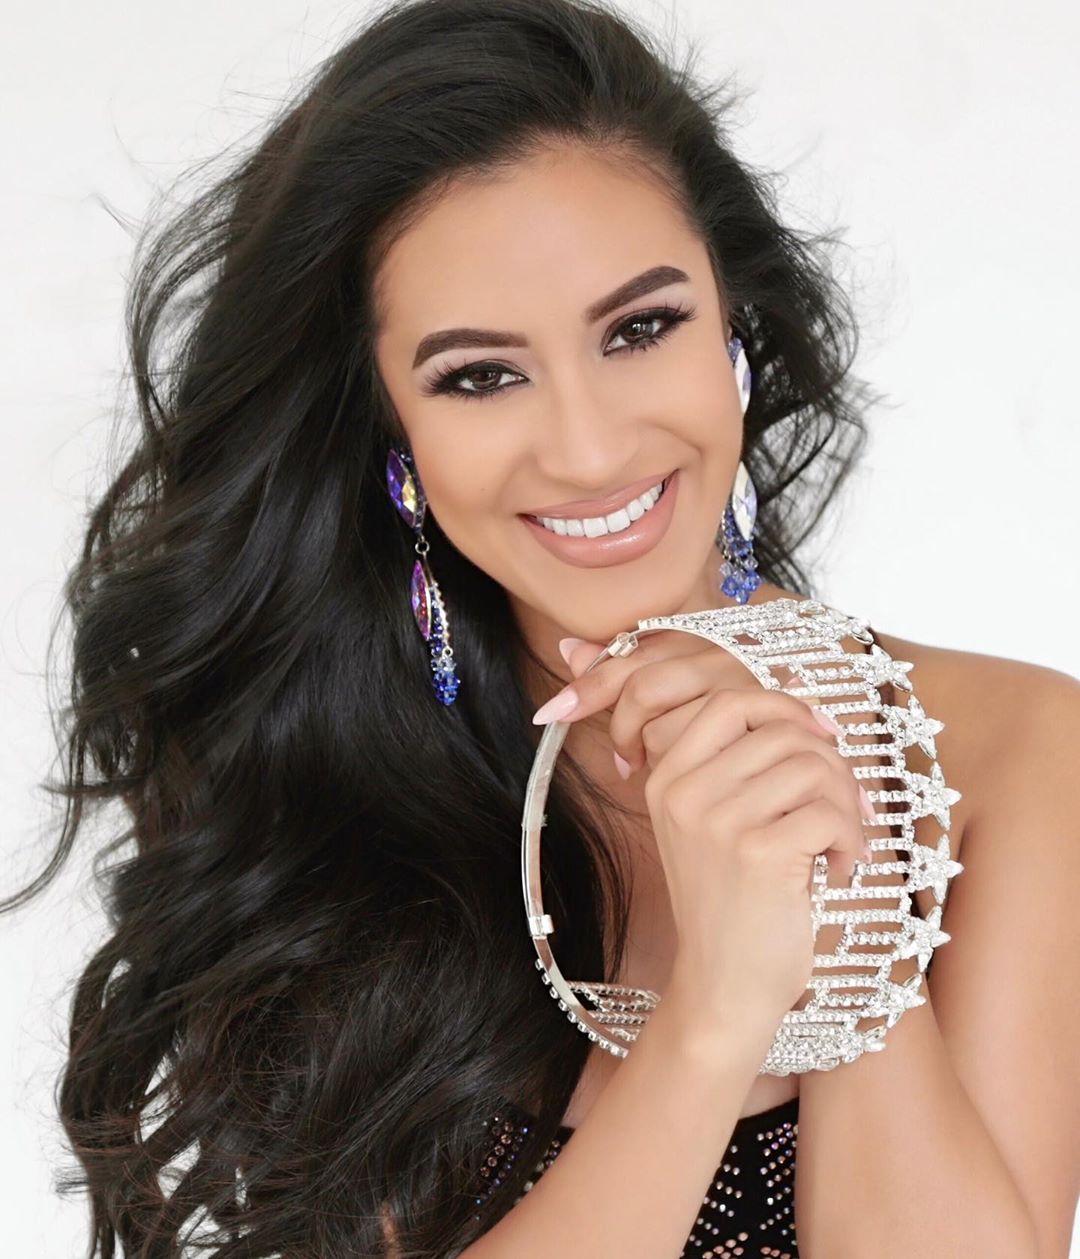 MissUSA - candidatas a miss usa 2020. final: 9 nov. IMhQ8S